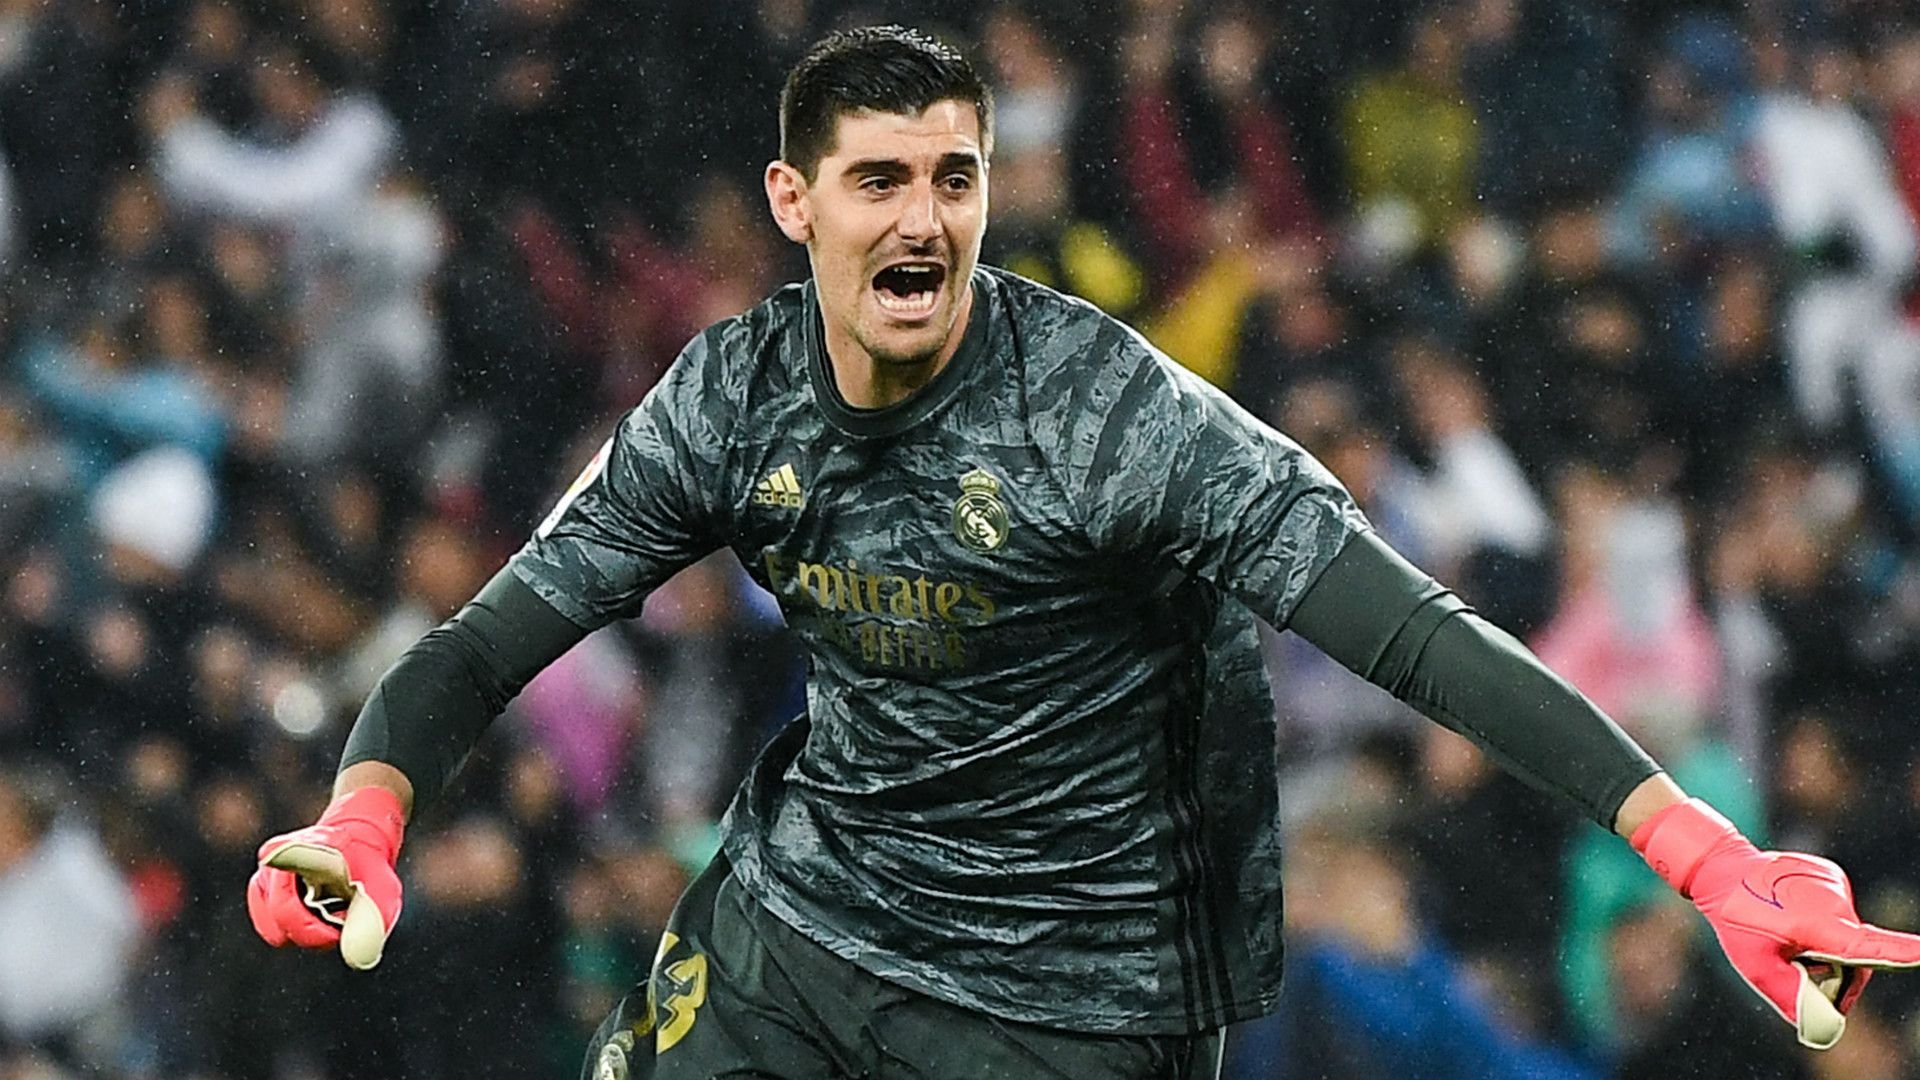 Courtois world's best & will shatter records at Real Madrid'